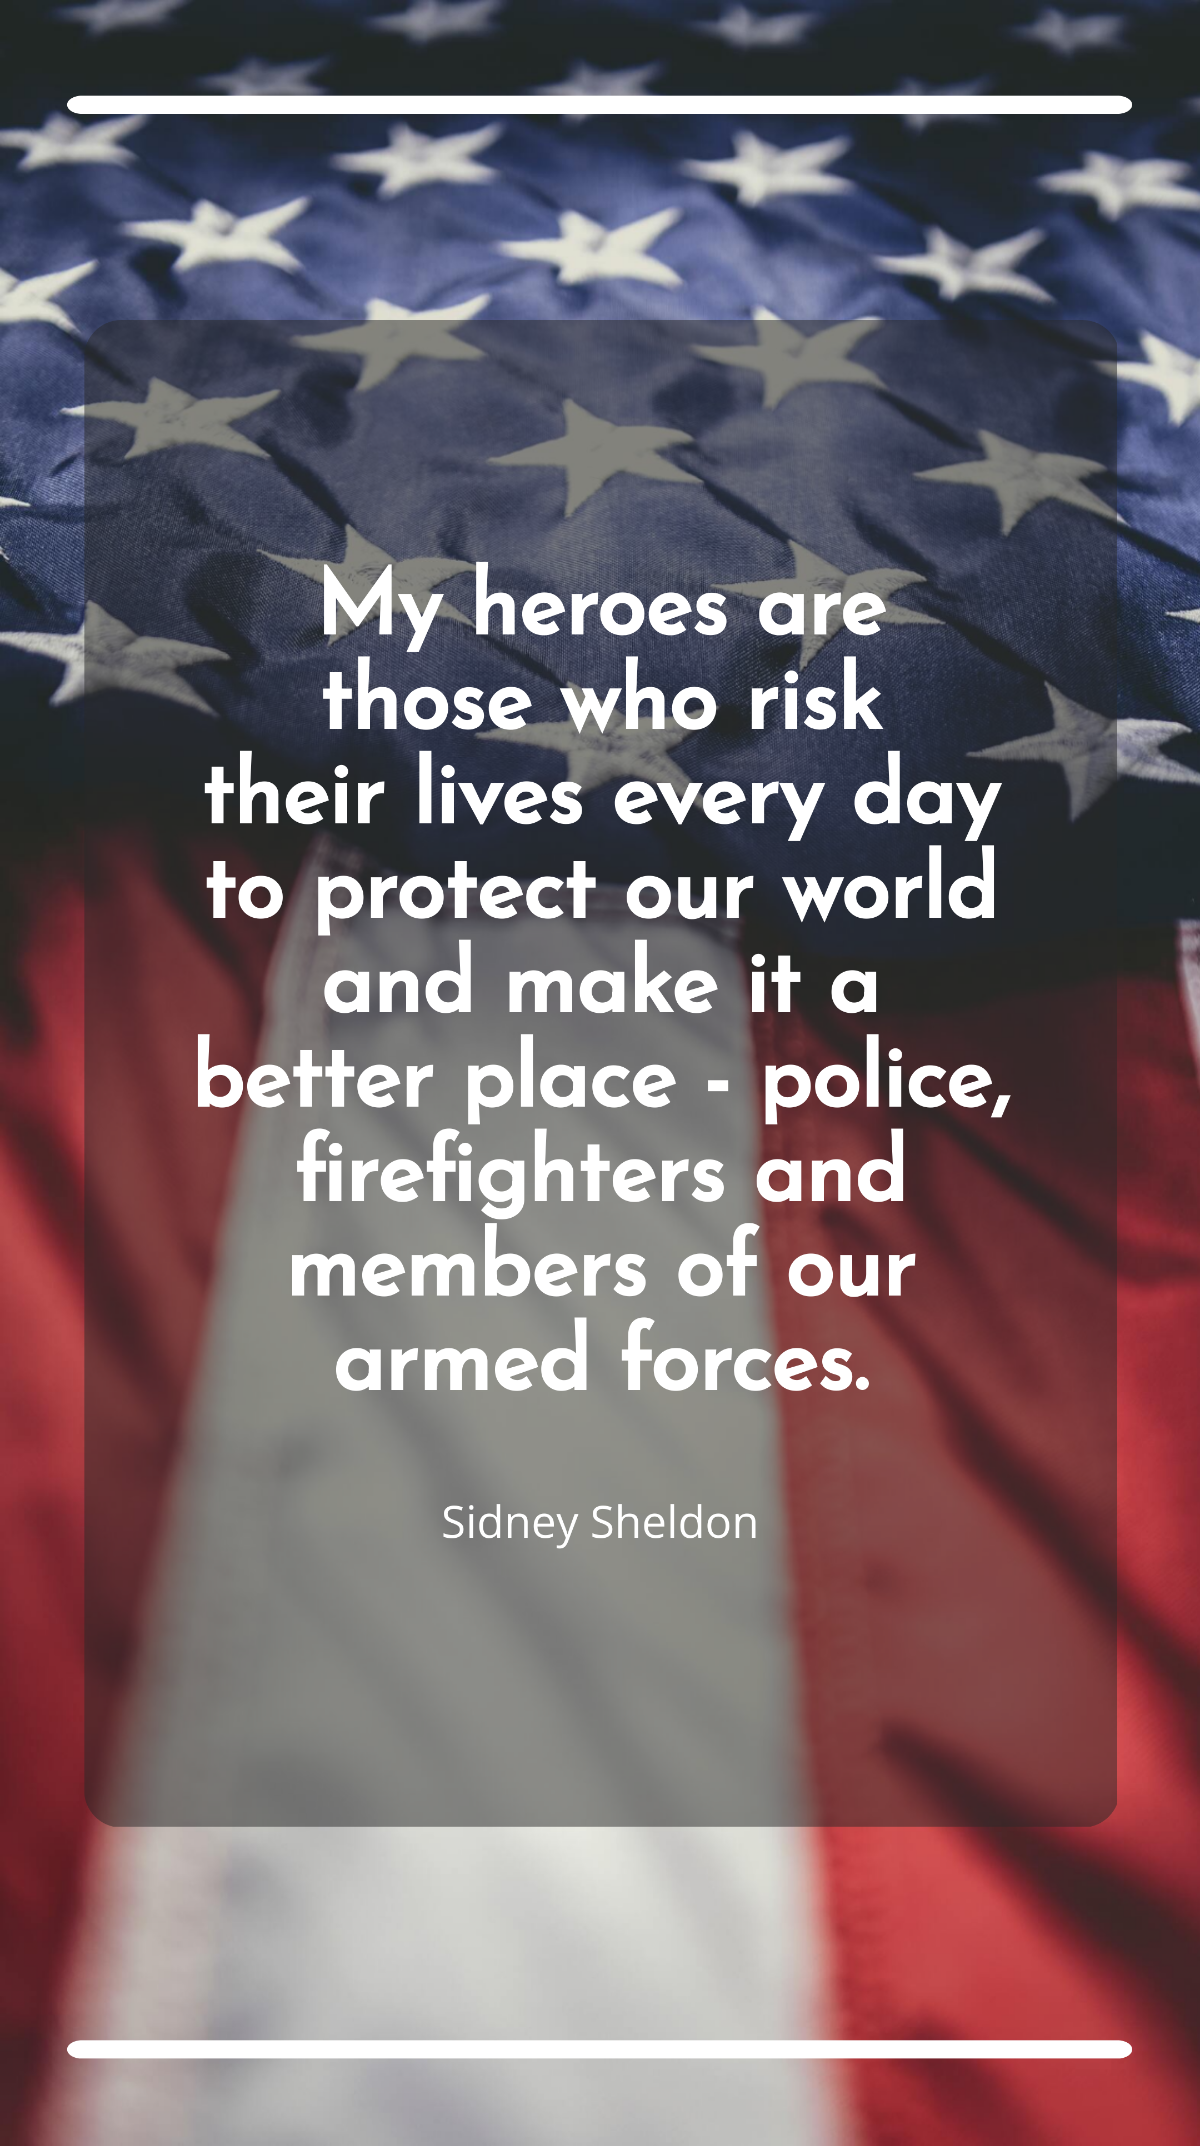 Sidney Sheldon - My heroes are those who risk their lives every day to protect our world and make it a better place - police, firefighters and members of our armed forces.